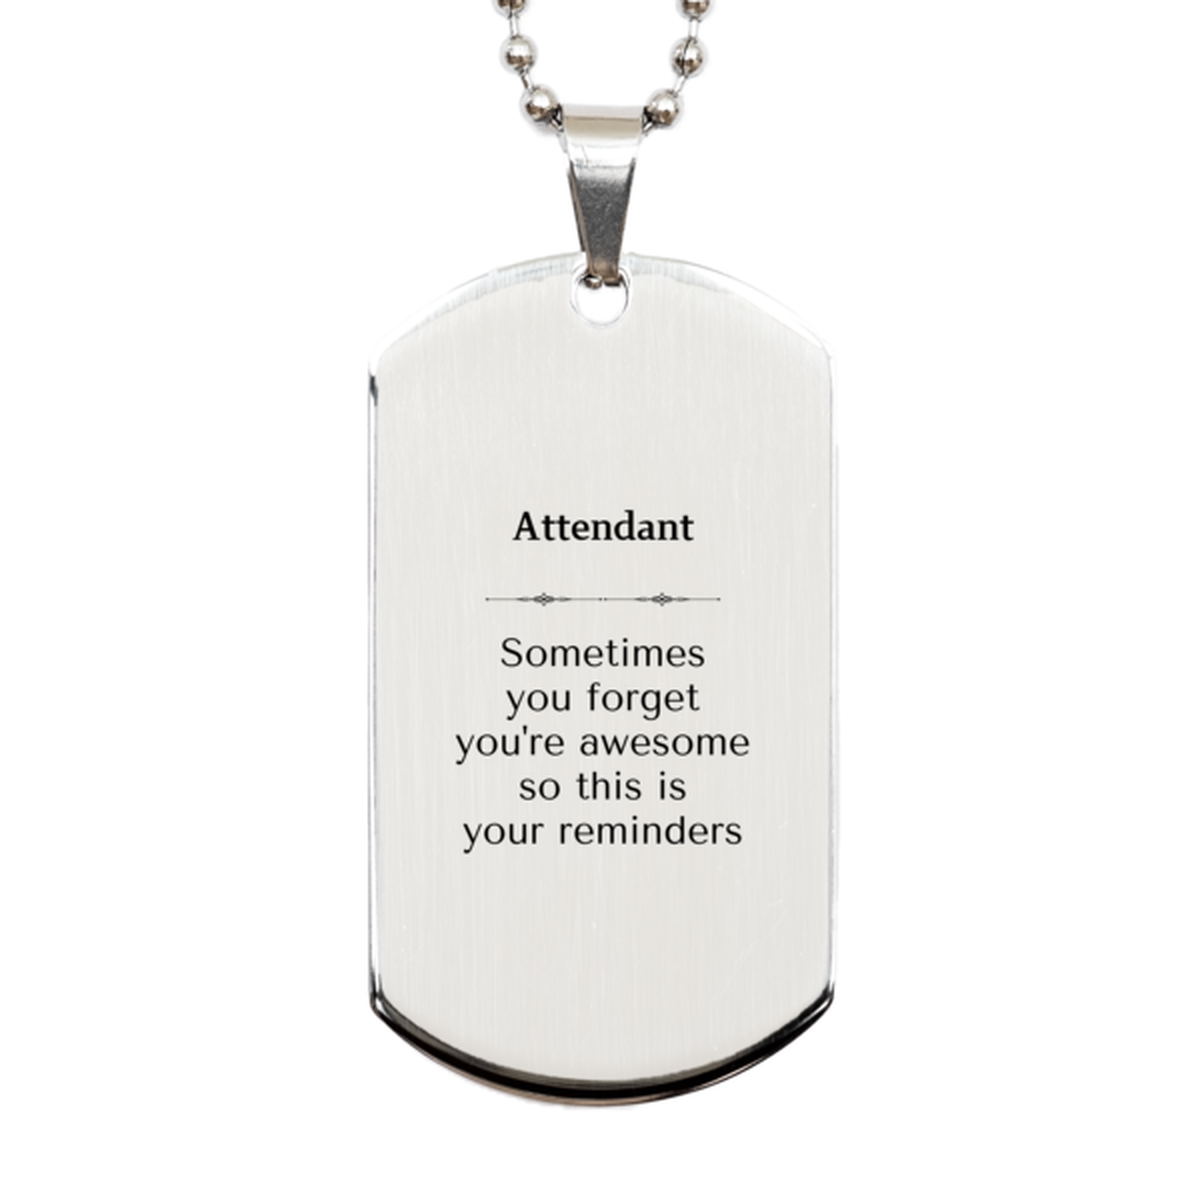 Sentimental Attendant Silver Dog Tag, Attendant Sometimes you forget you're awesome so this is your reminders, Graduation Christmas Birthday Gifts for Attendant, Men, Women, Coworkers